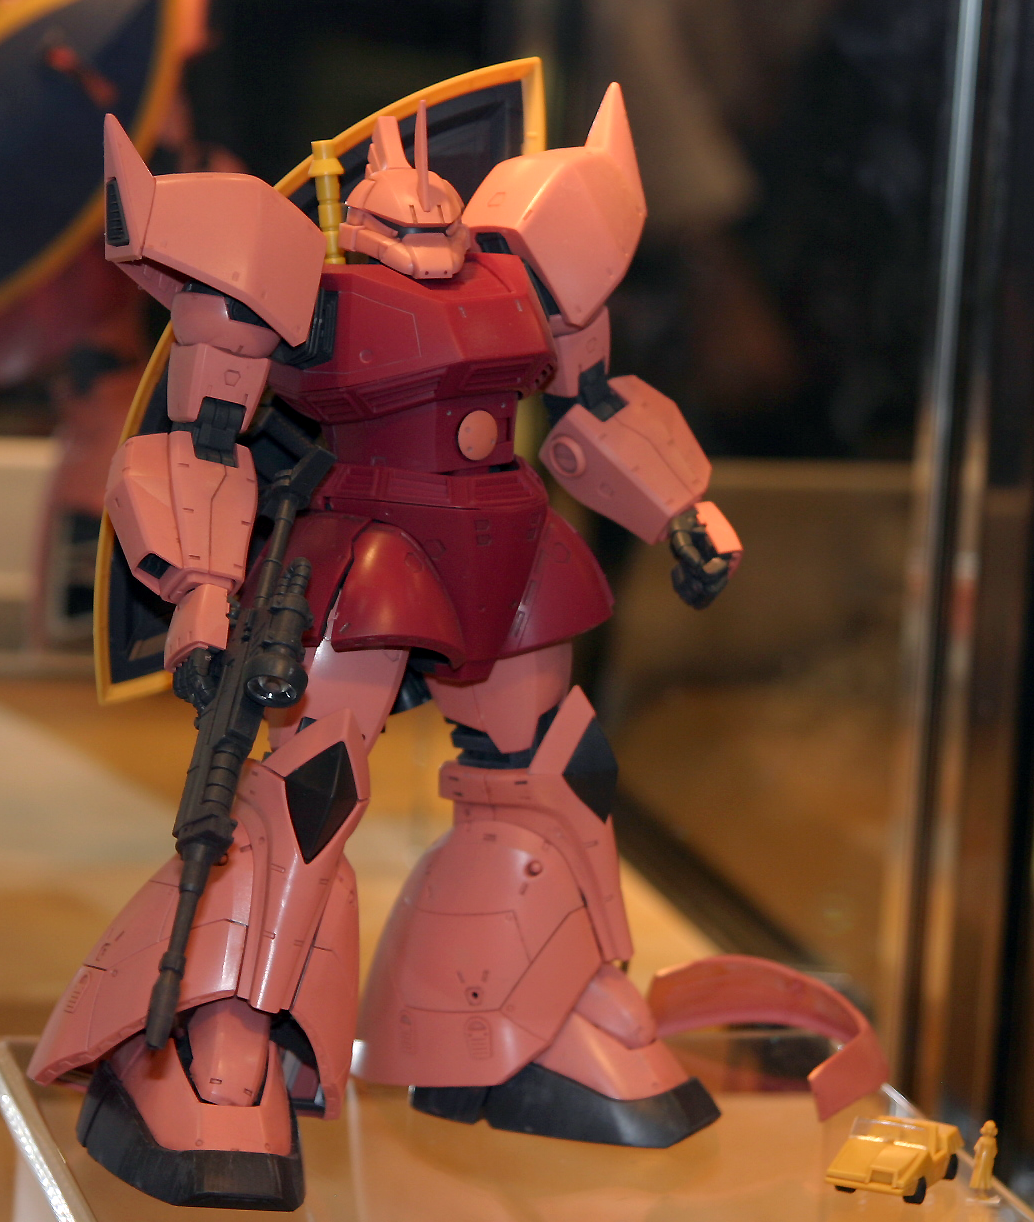 Bandai 1/100 MG Gundam Gelgoog Char Aznable's Scale Kit From Japan2 for sale online 